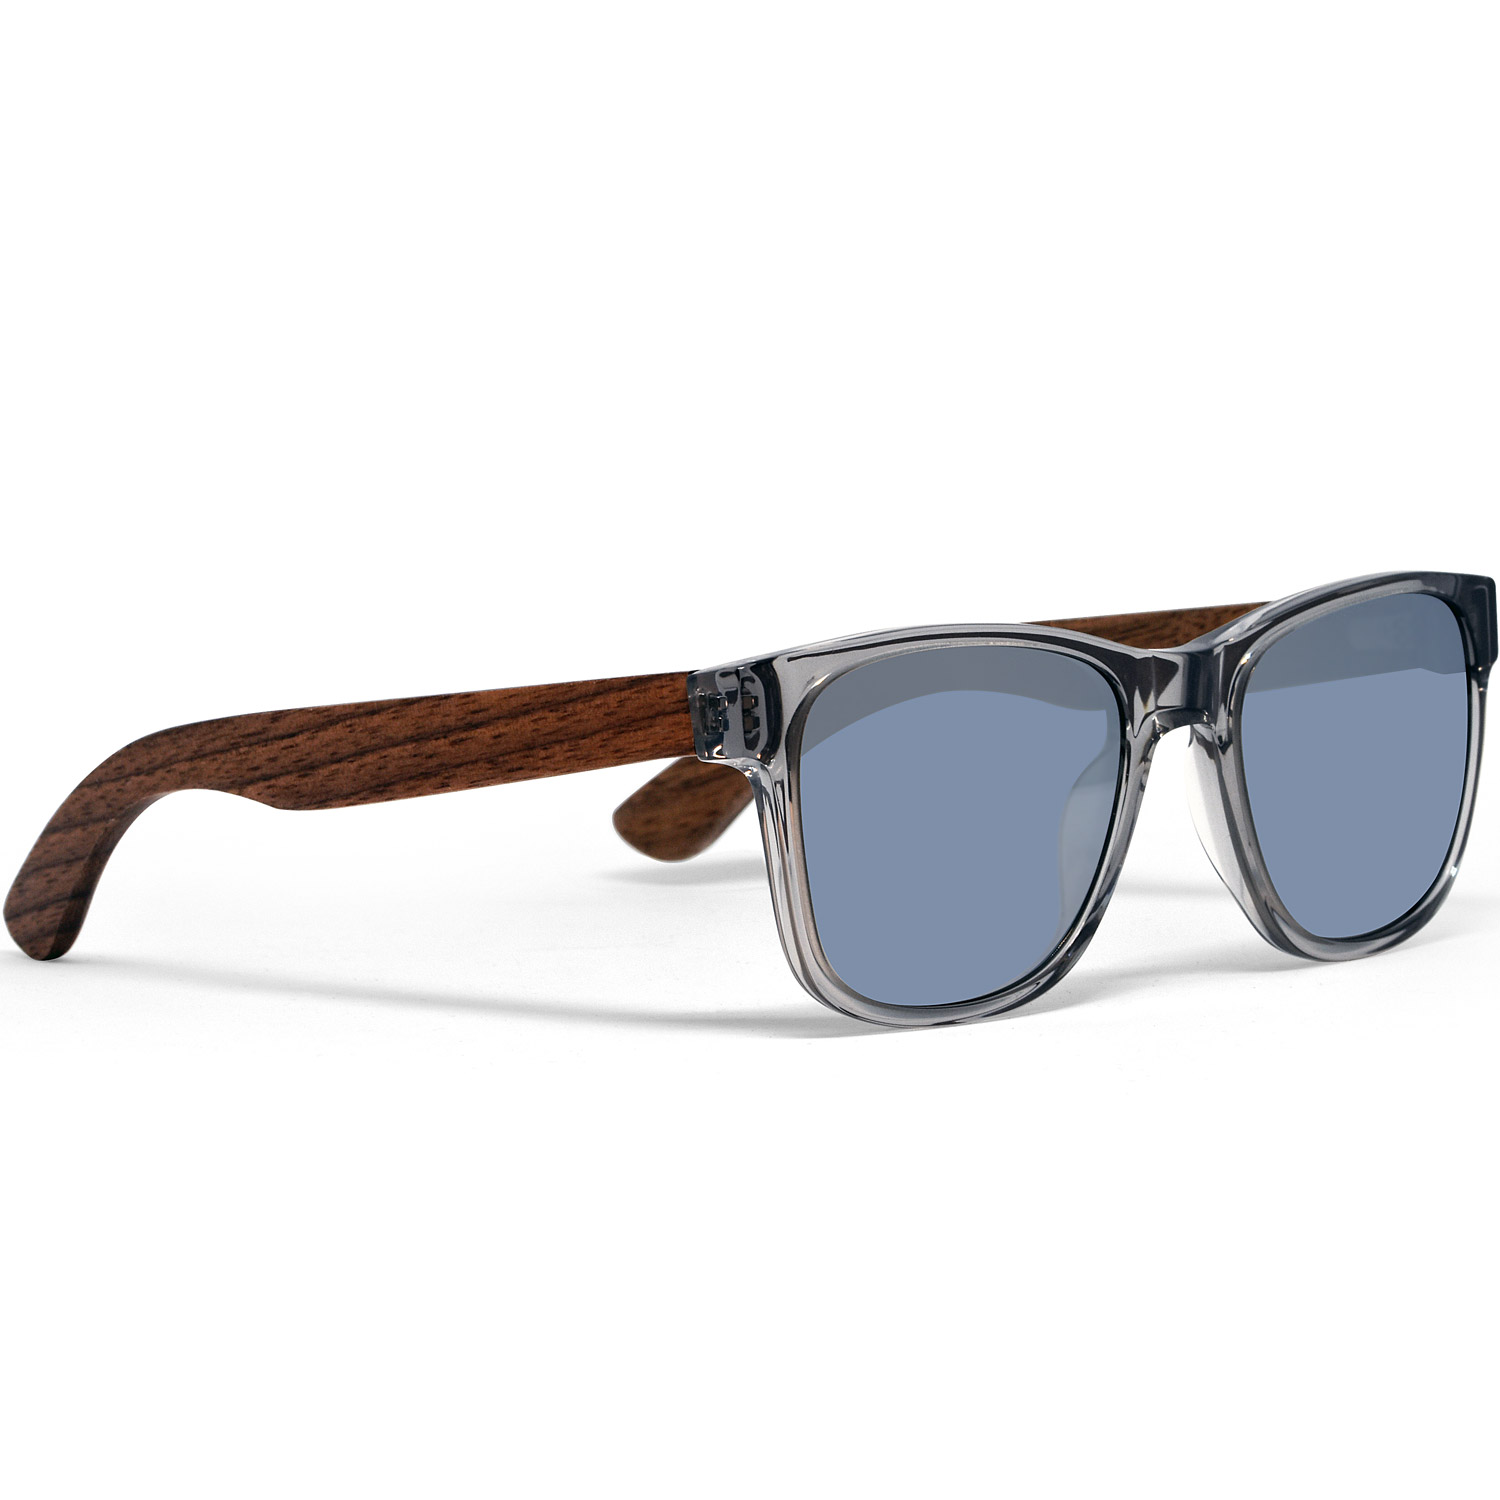 Walnut wood sunglasses classic style transparent frame with silver lenses right